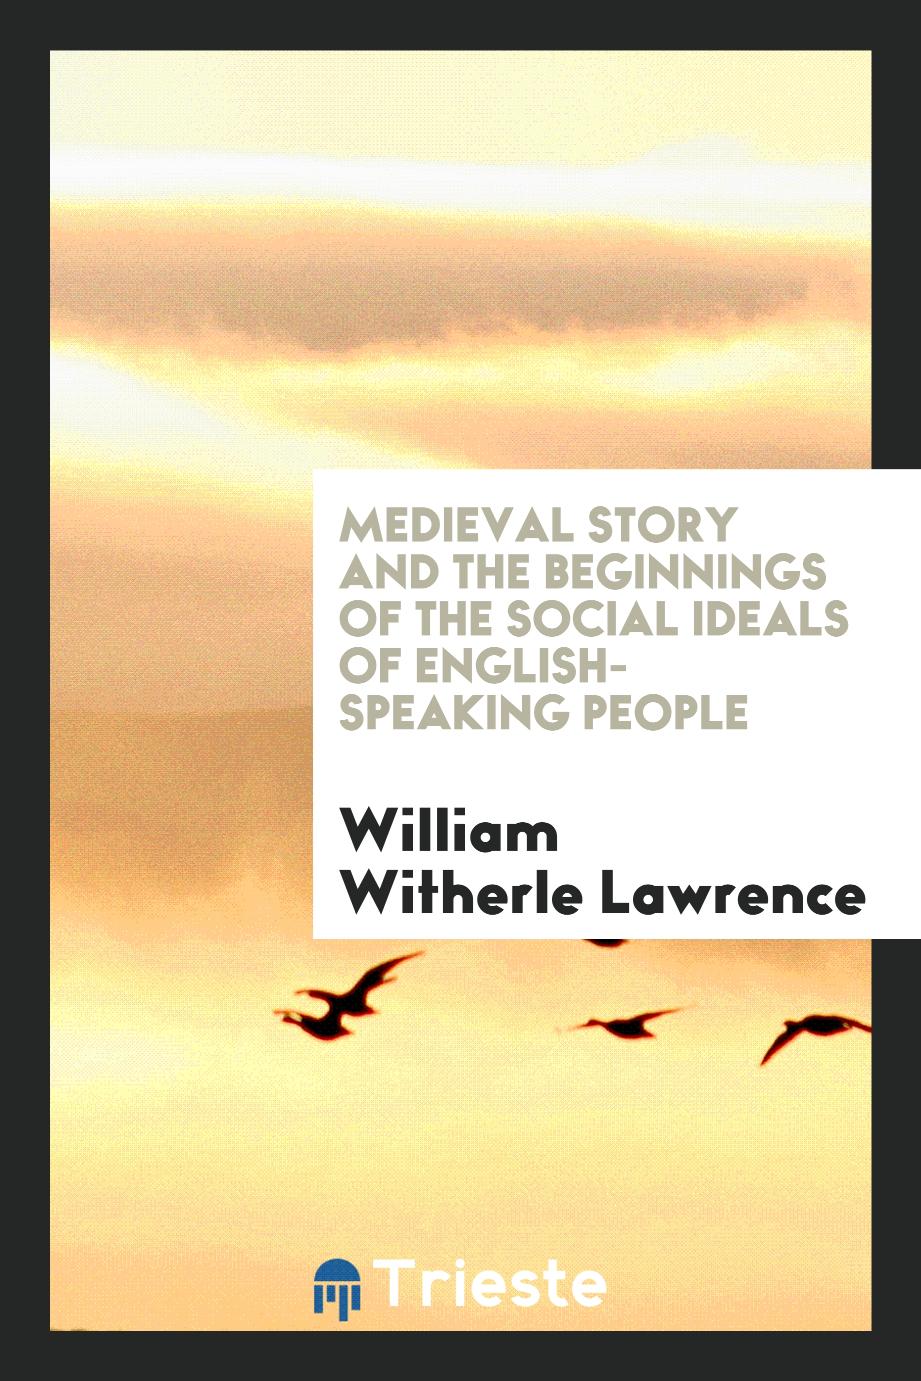 Medieval story and the beginnings of the social ideals of English-speaking people